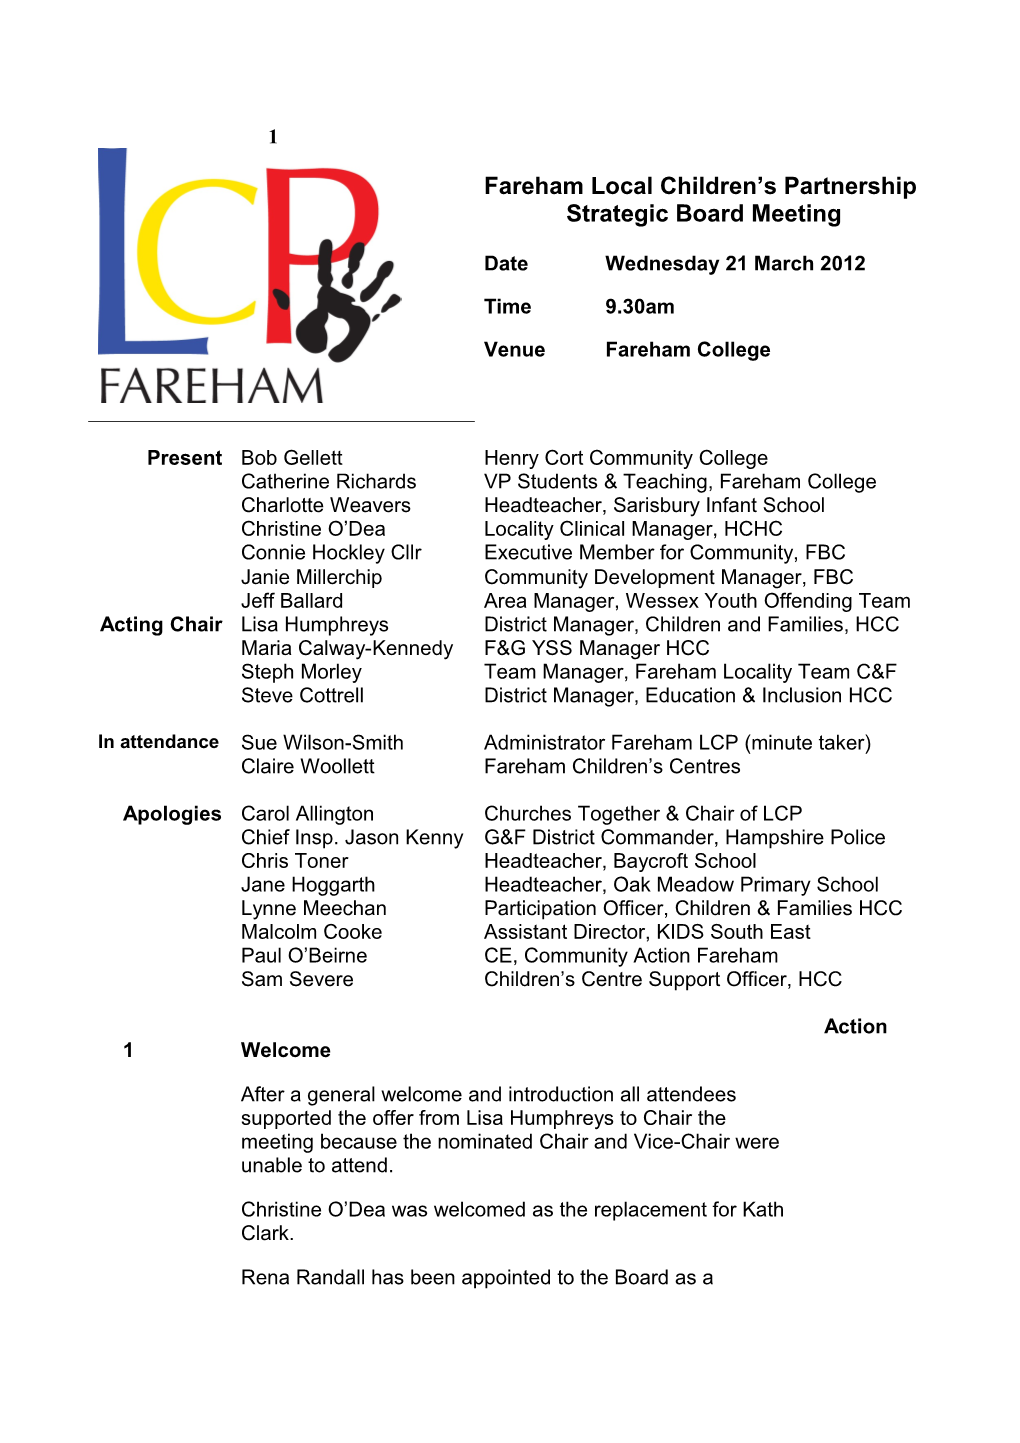 Minutes of LCP Strategic Board Meeting 21.03.12